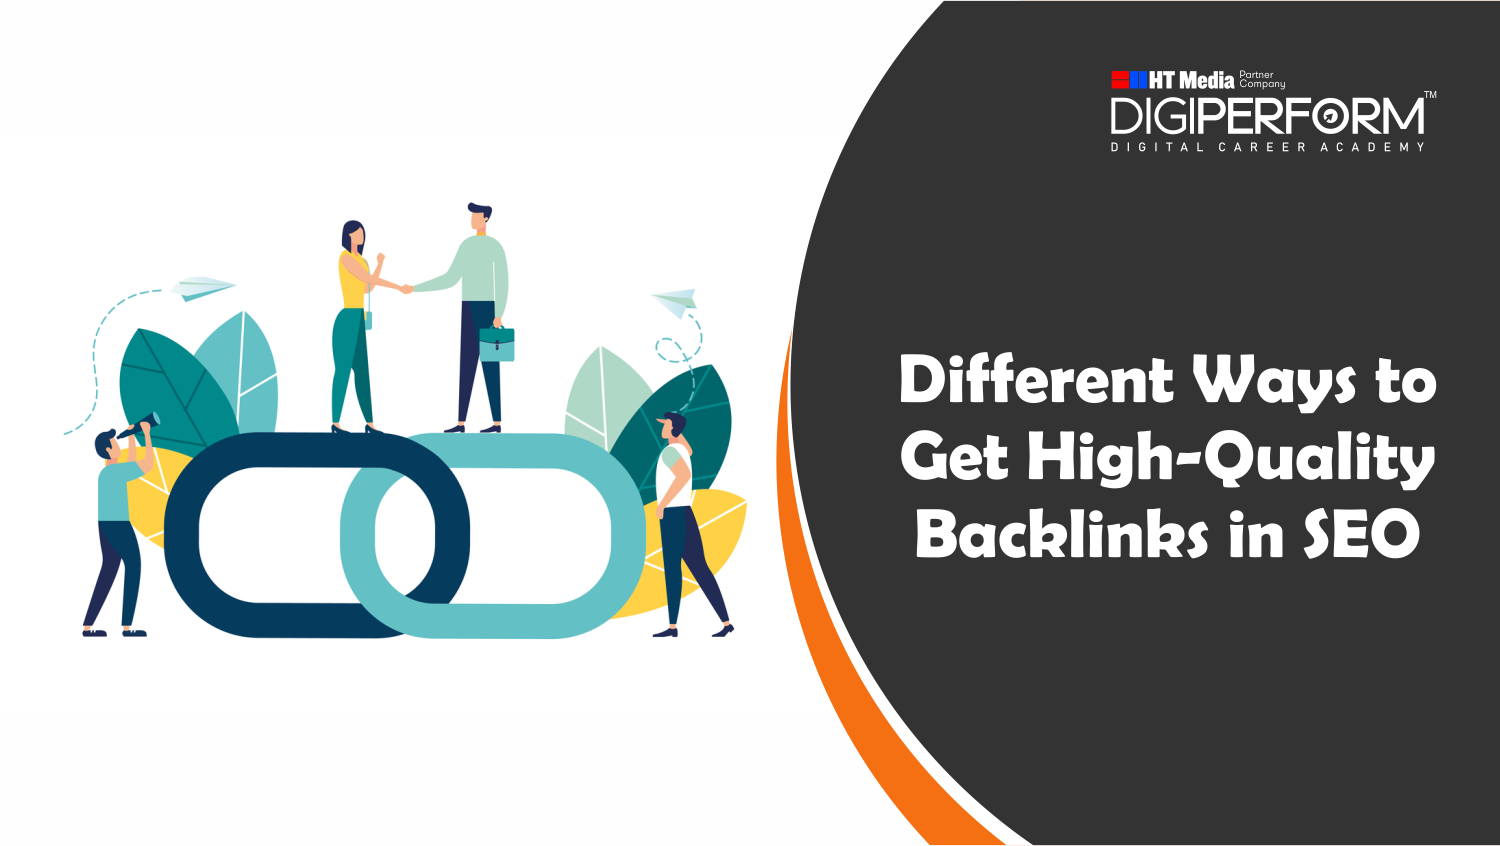 Different Ways to Get High-Quality Backlinks in SEO